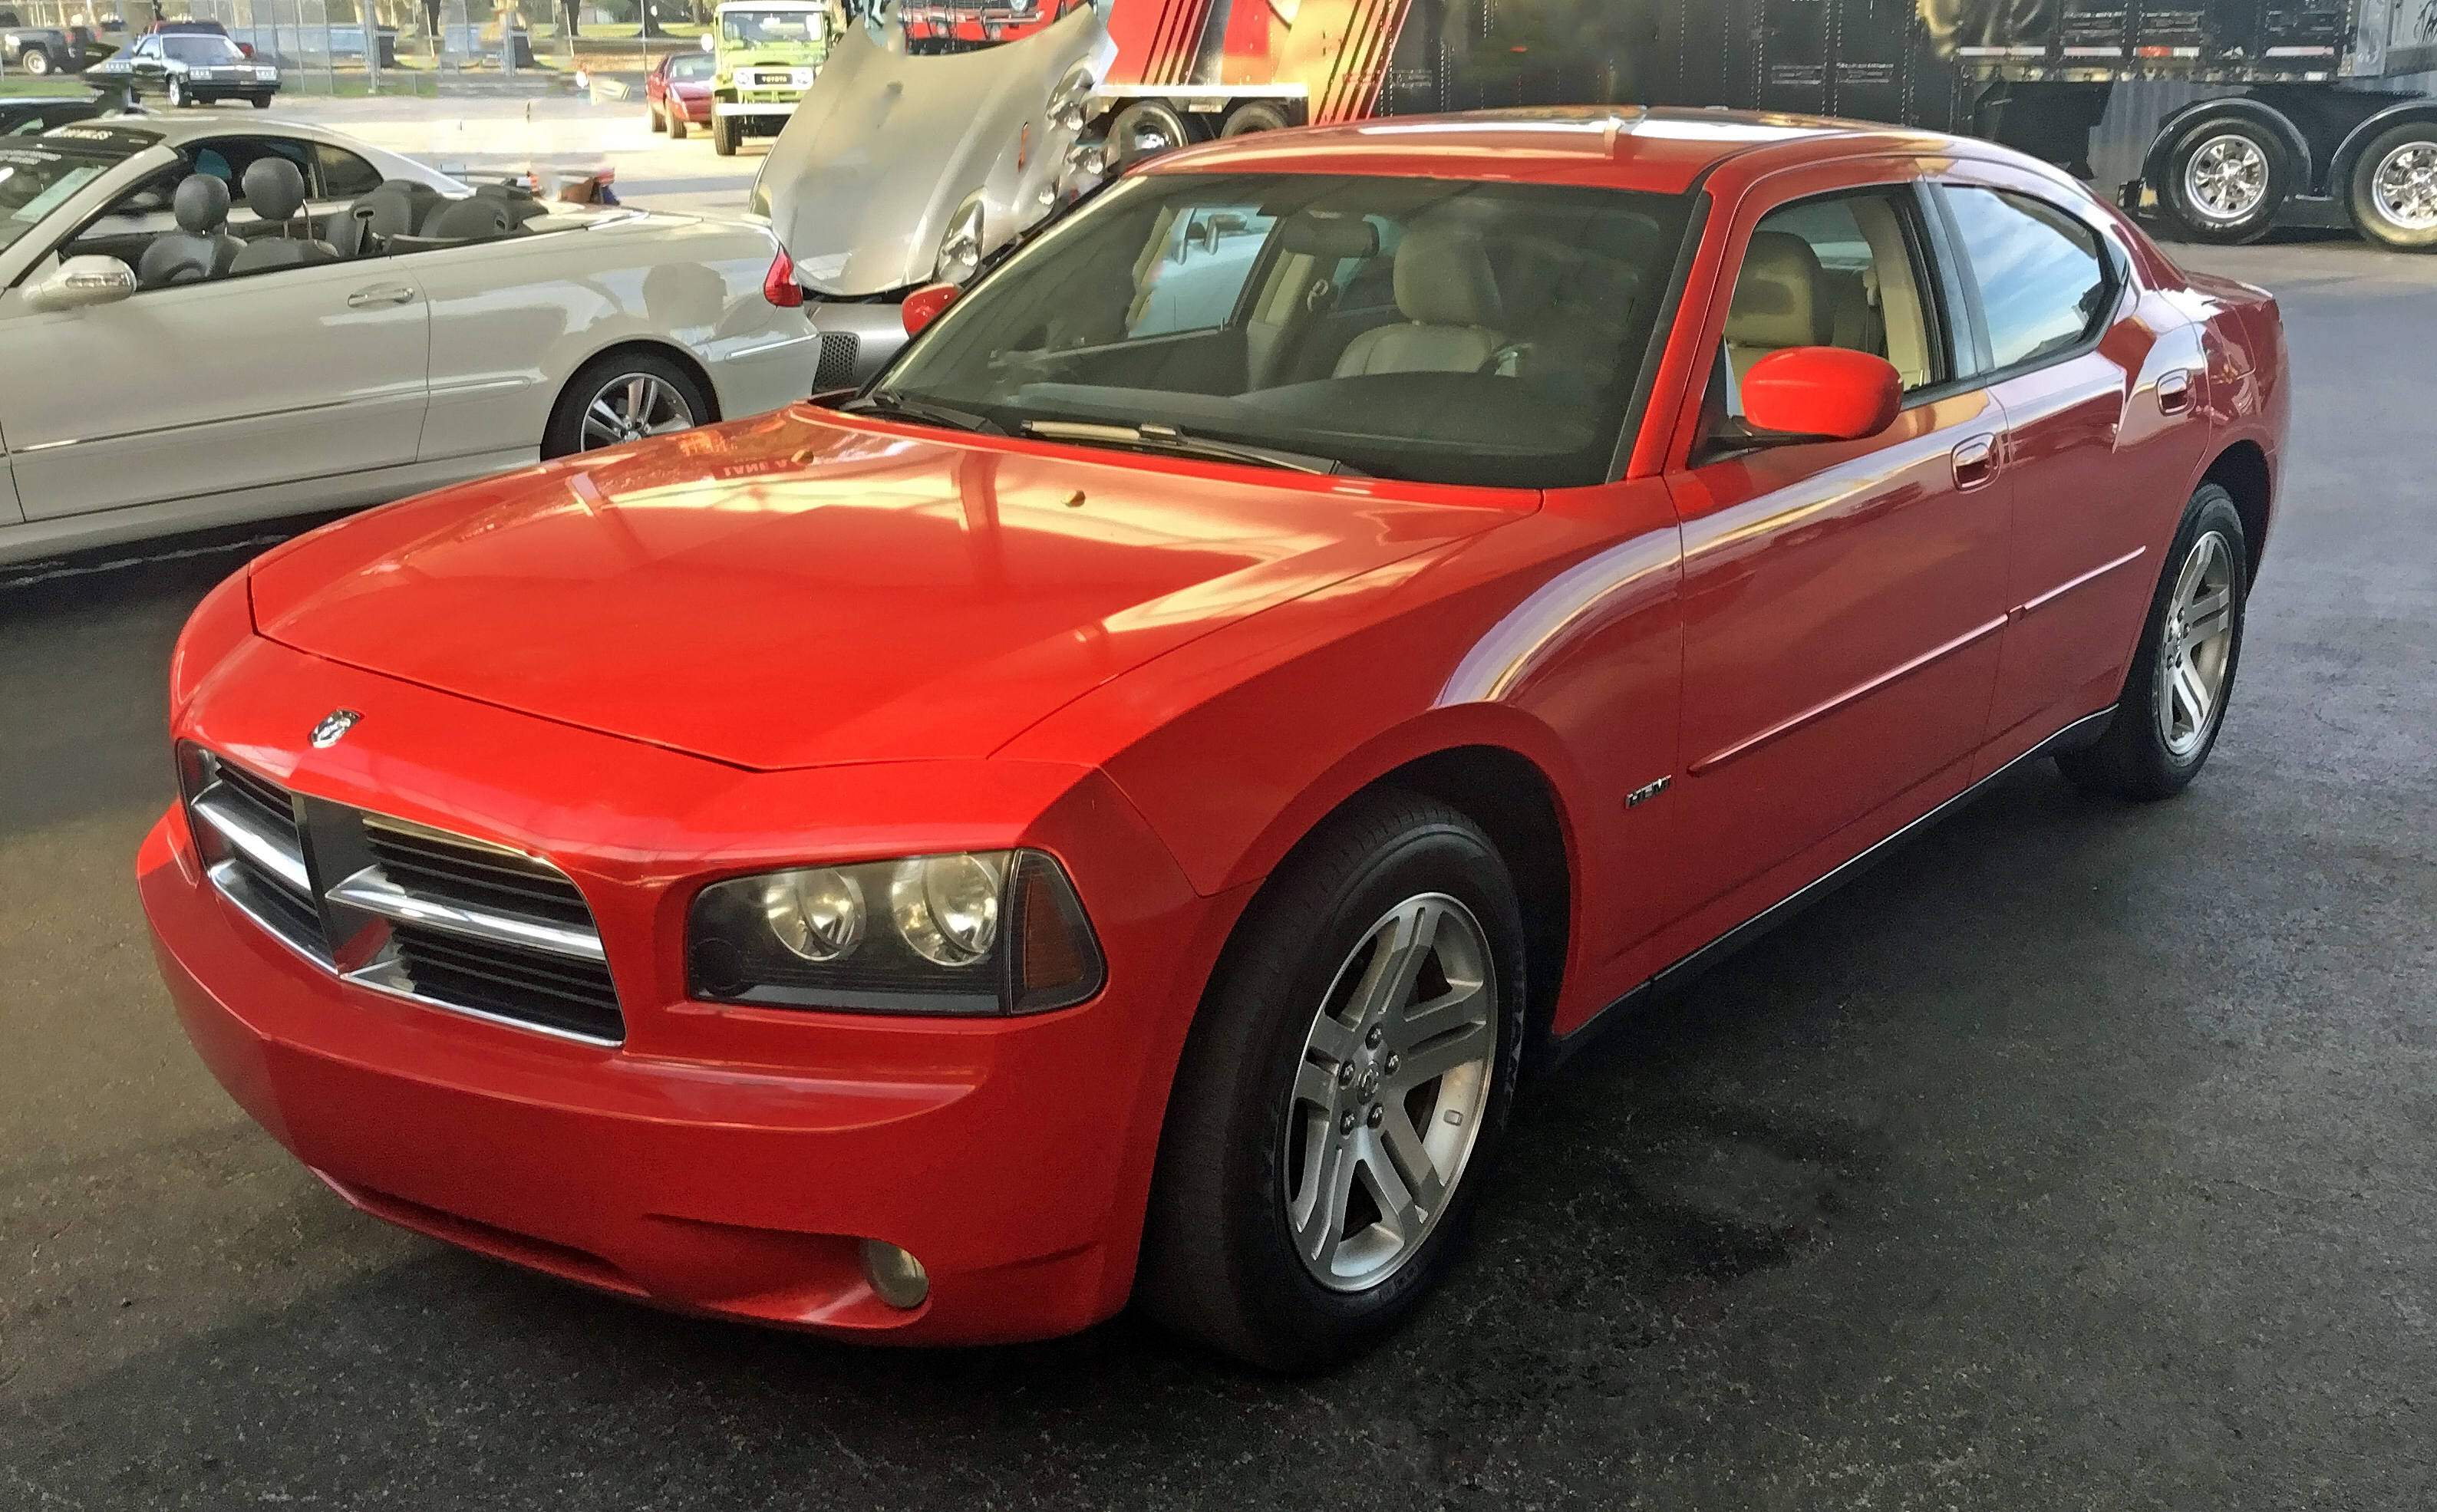 2009 Dodge Charger SRT-8 Values | Hagerty Valuation Tool®